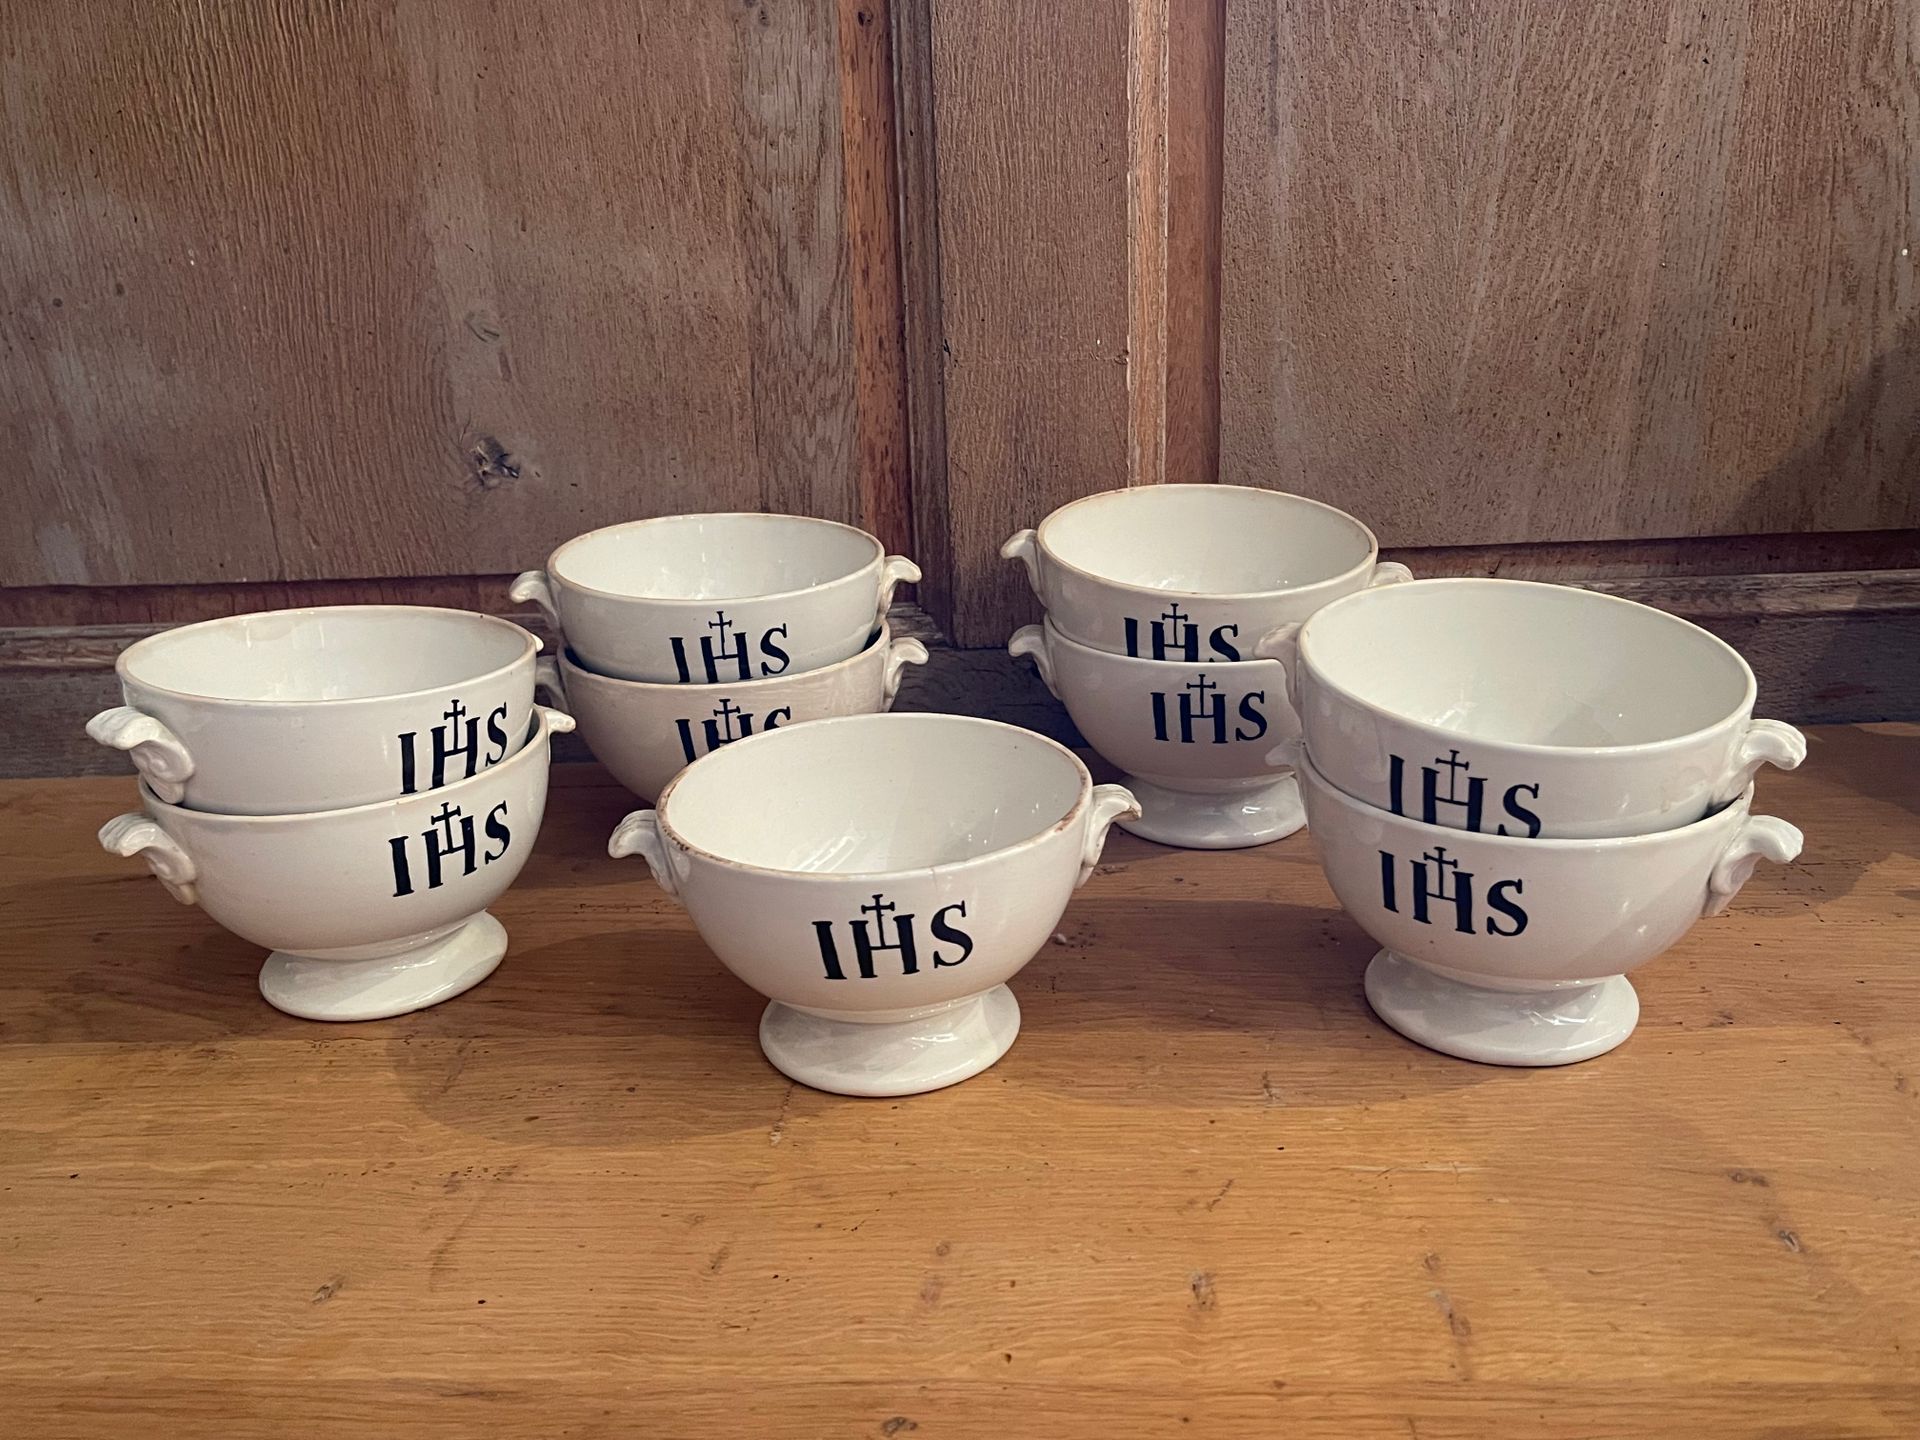 Null Nine white earthenware community bowls monogrammed "IHS".